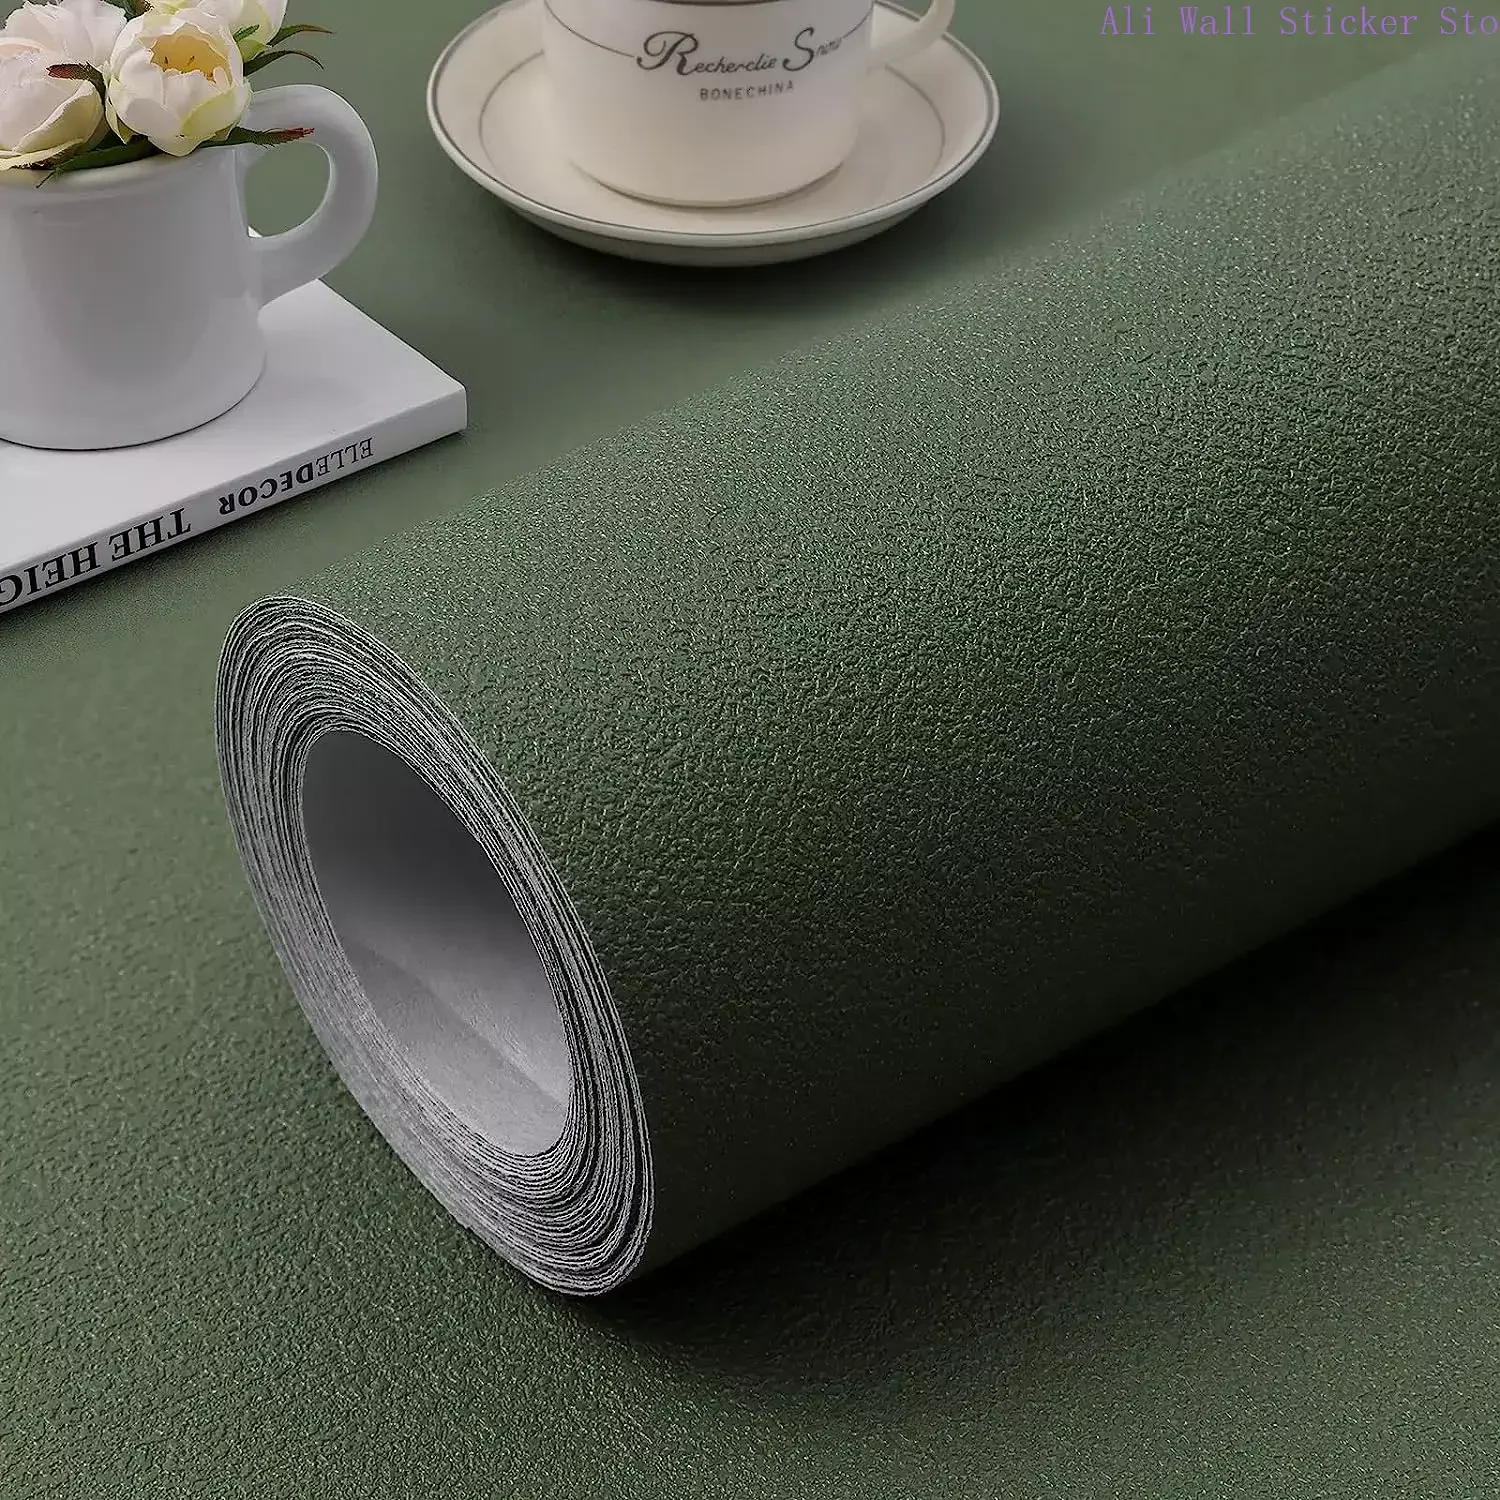 modern wave stripe self adhesive removable wallpaper home decaration waterproof contact paper and shelf liner diy vinyl stick Green Wallpaper Self Adhesive and Removable Vinyl 3D Film Stick Paper To Apply Wall Home Decorative Liner Table and Door Reform